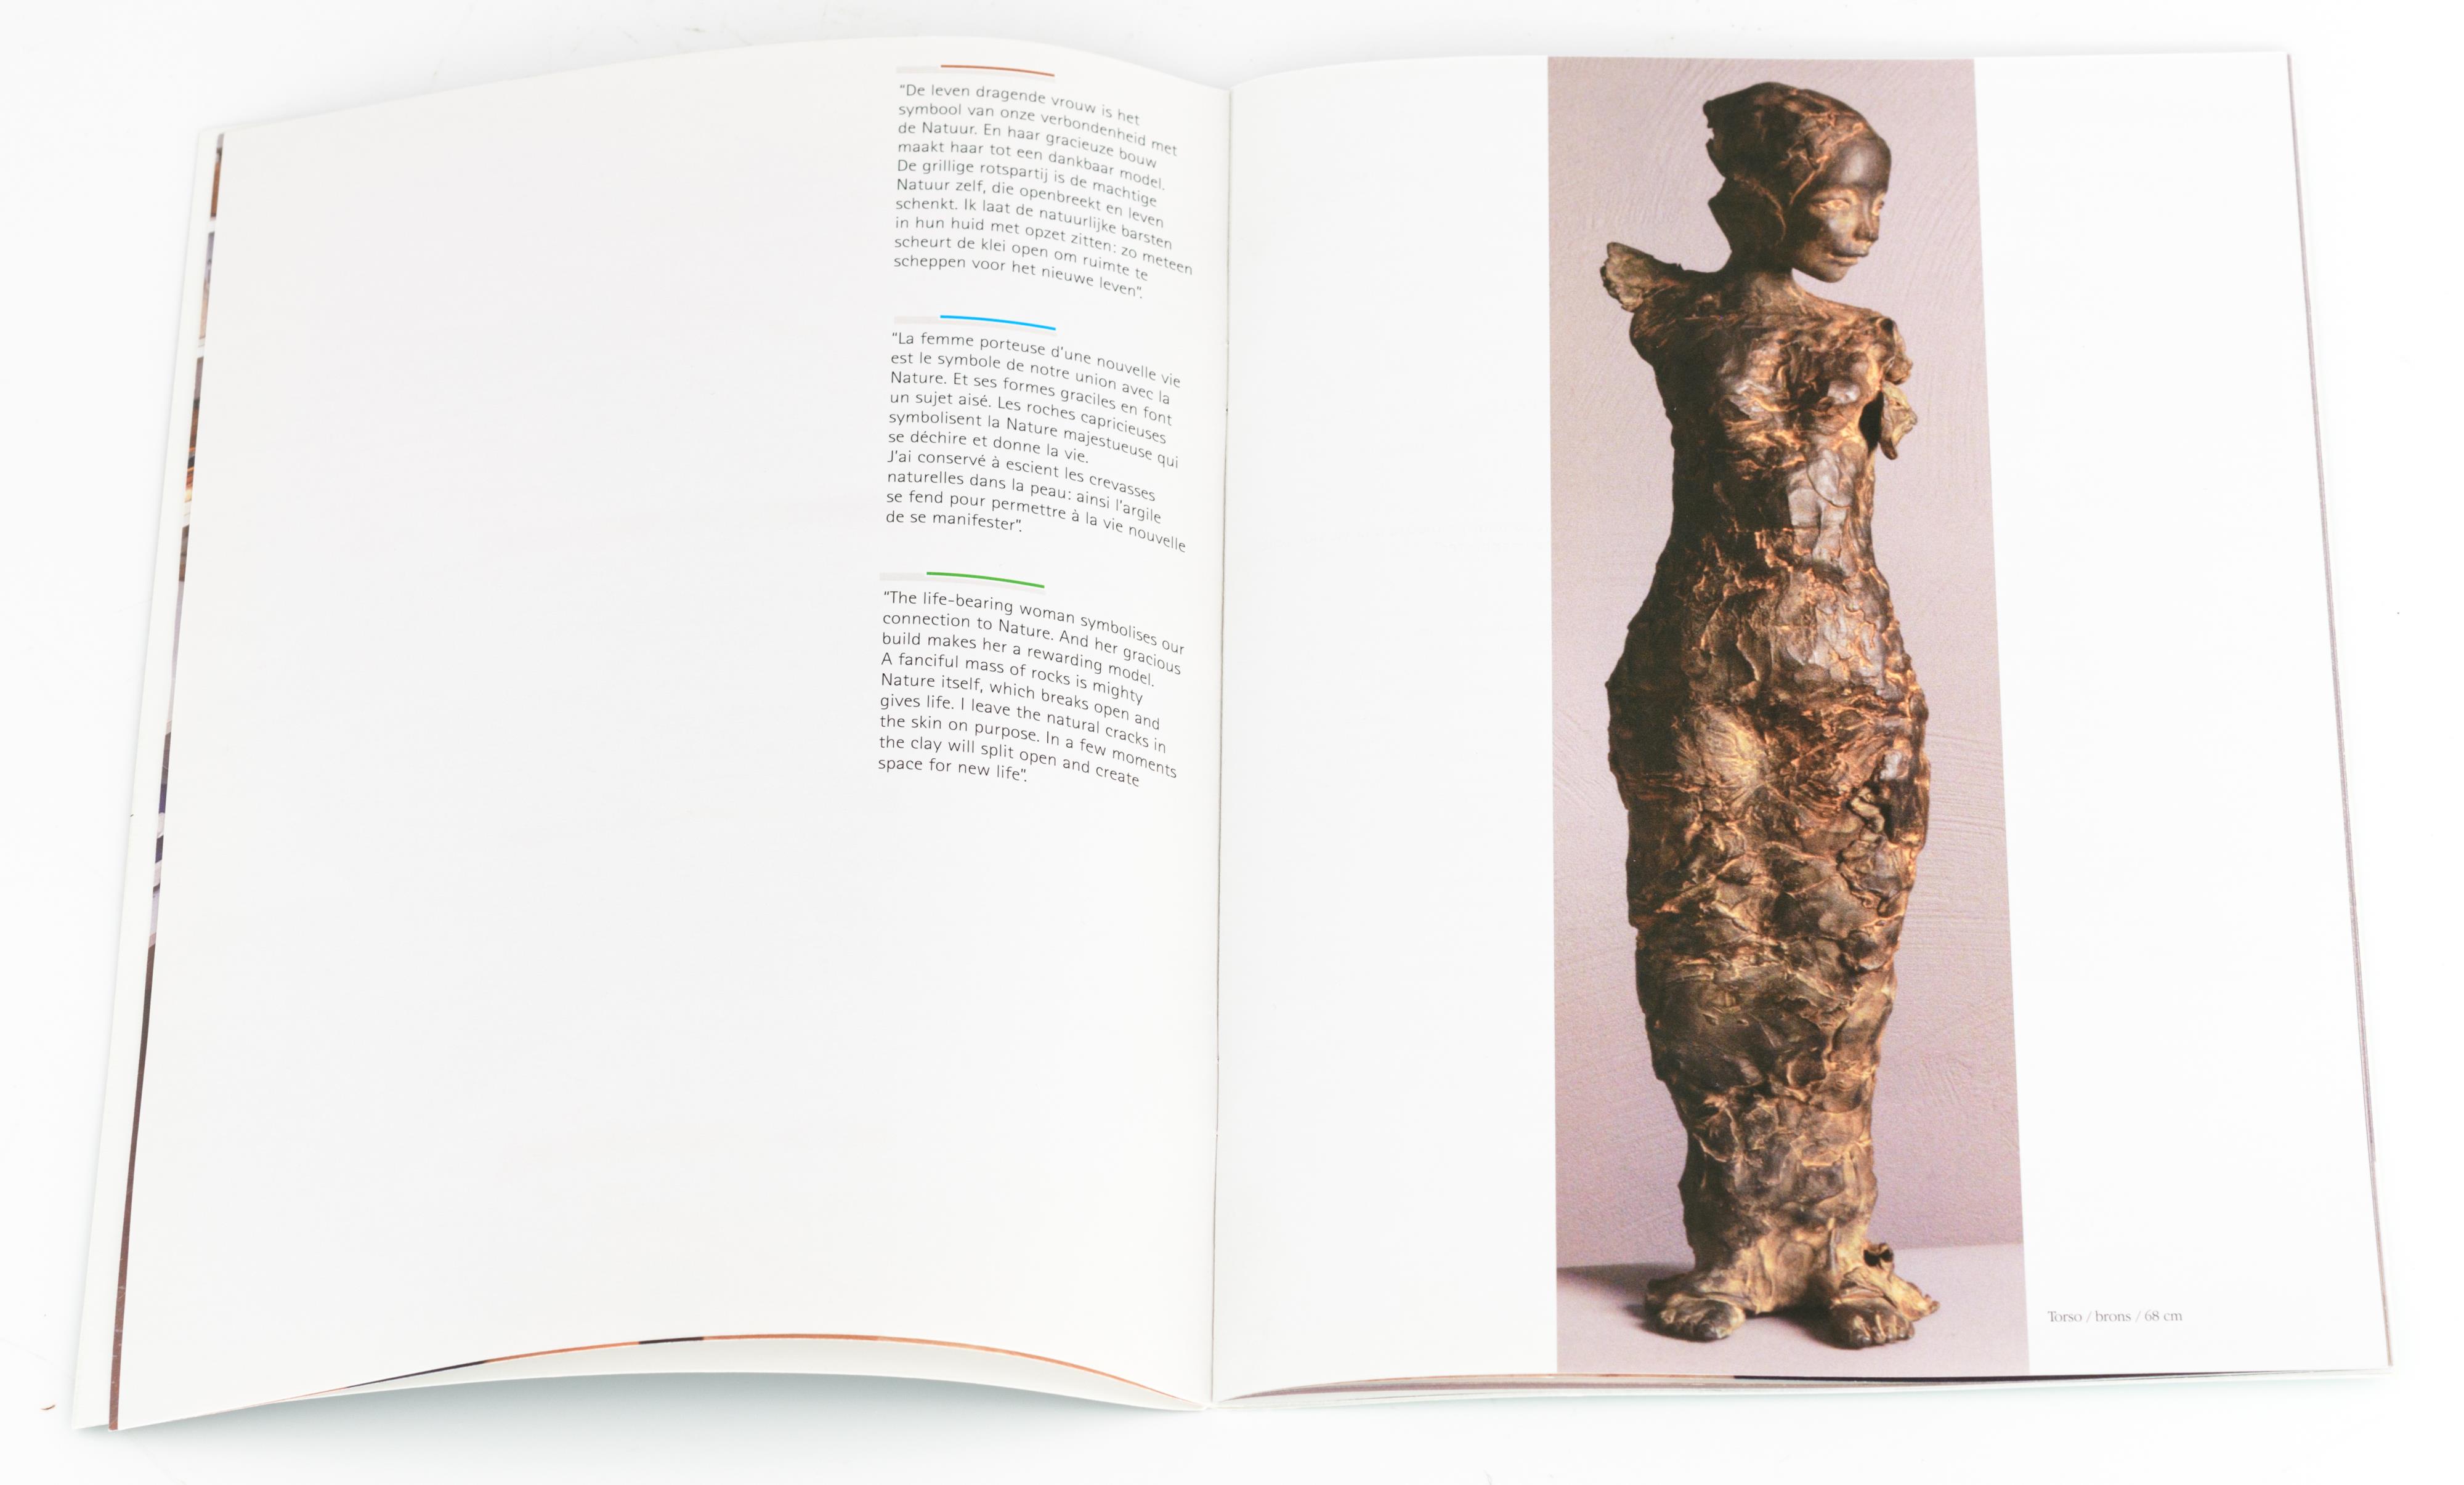 Vanlerberghe A., a standing woman, with a casting mark of 'Art Casting Belgium', patinated bronze on - Image 9 of 9